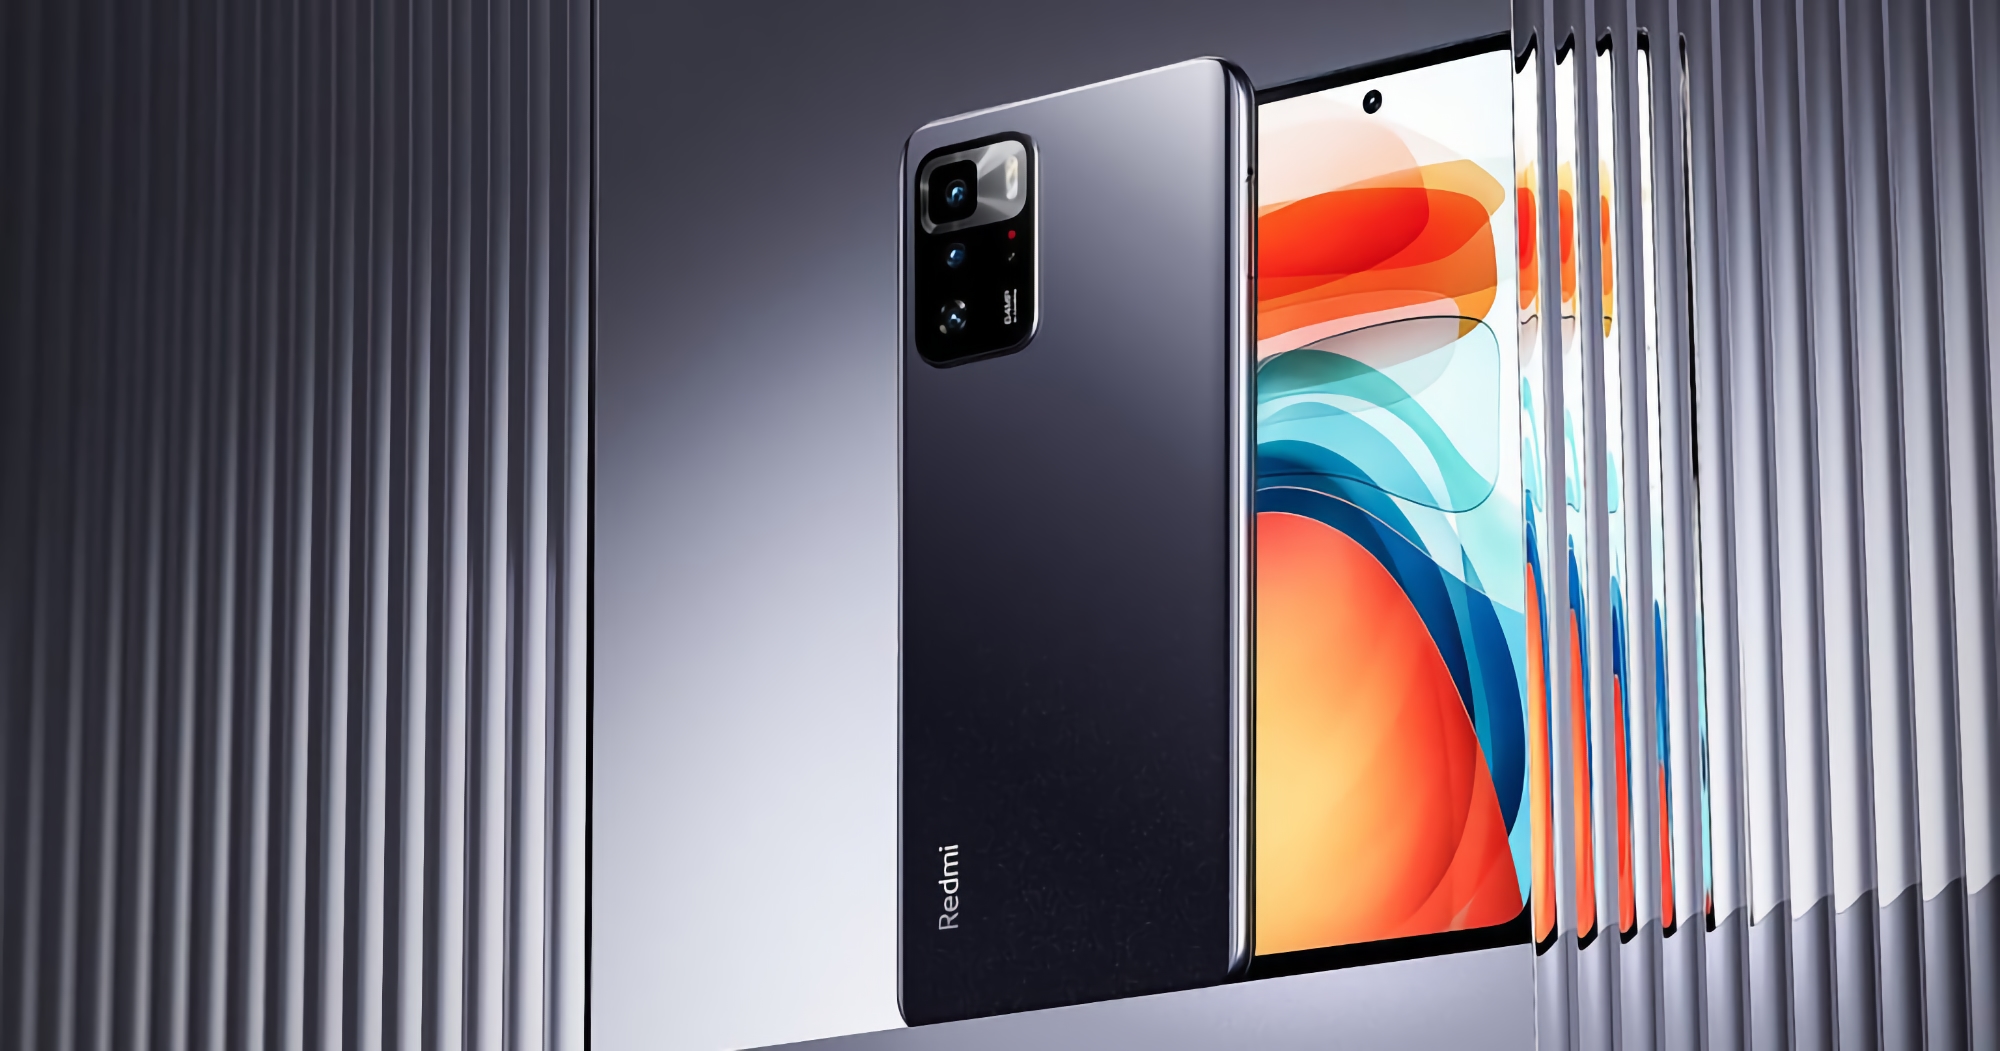 Unexpectedly: Xiaomi will launch the Chinese version of the Redmi Note 10 Pro 5G for the global market as POCO X3 GT